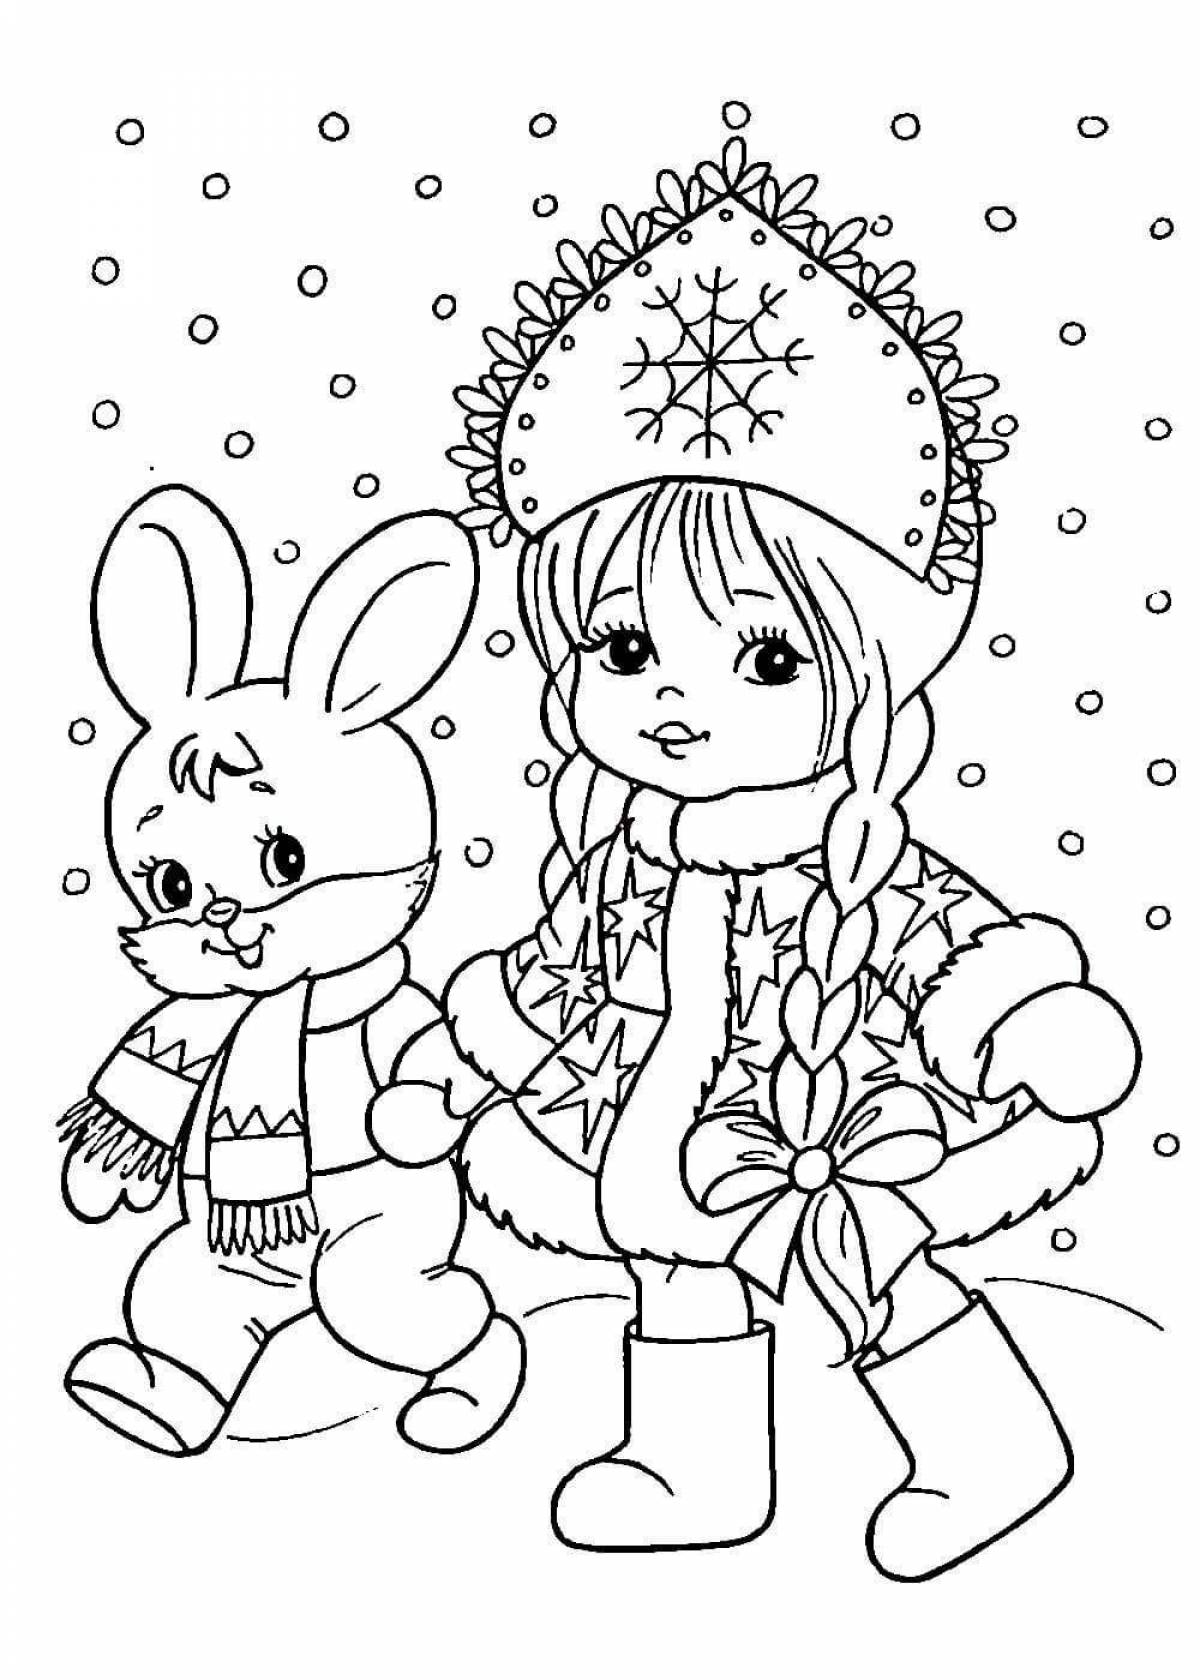 Snow Maiden coloring book for kids